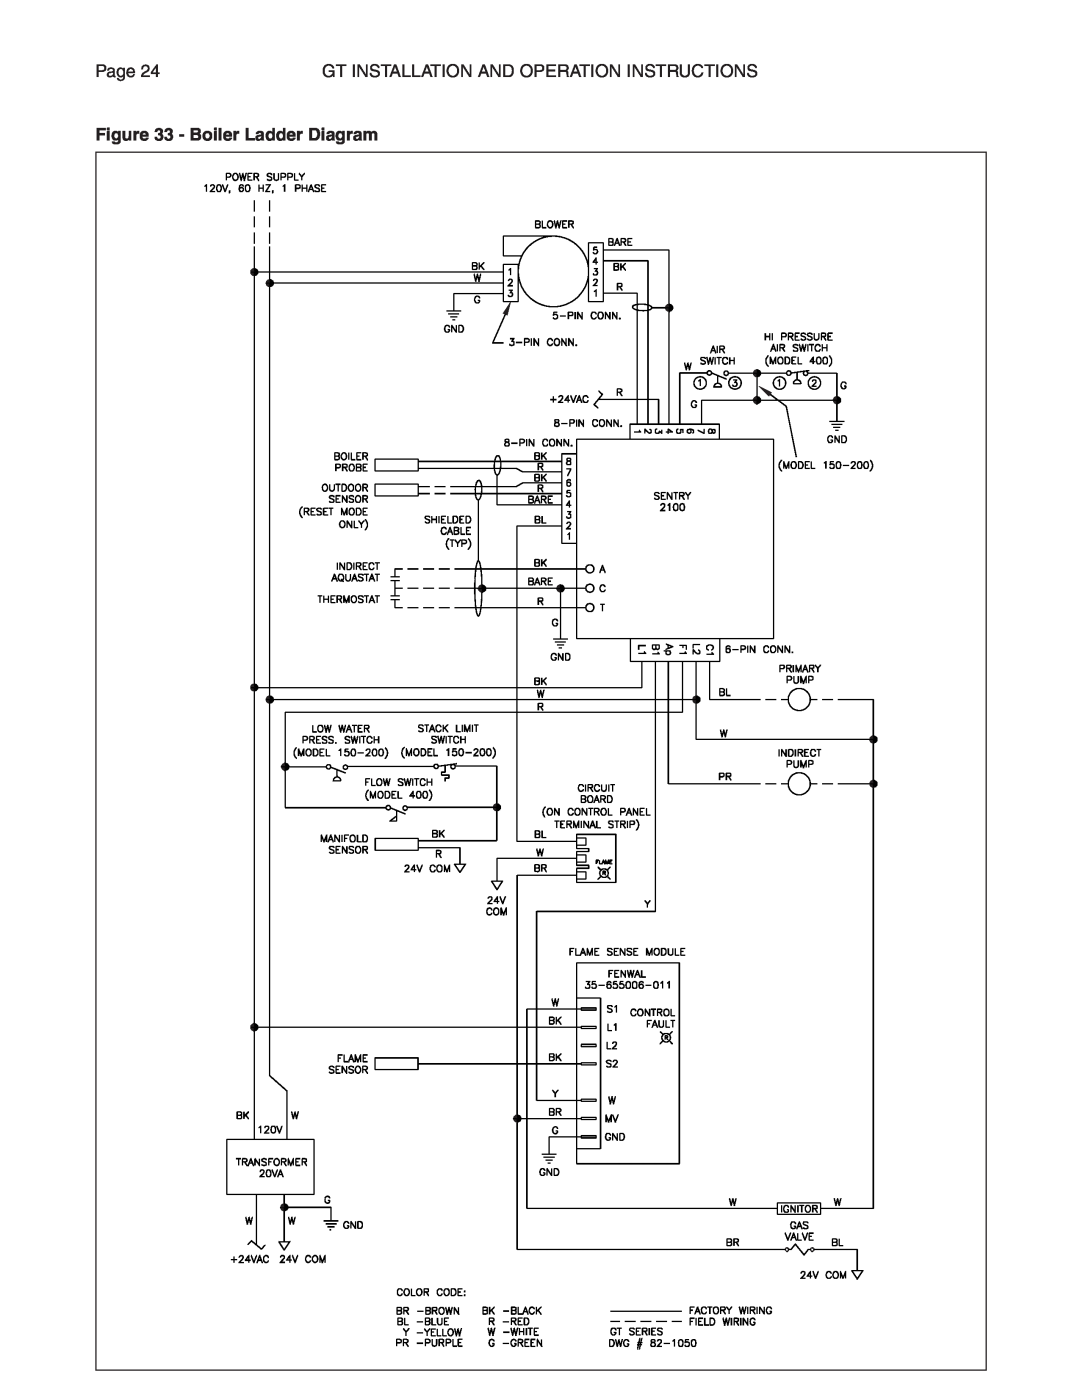 Smith Cast Iron Boilers GT Series manual Page, Gt Installation And Operation Instructions, Boiler Ladder Diagram 